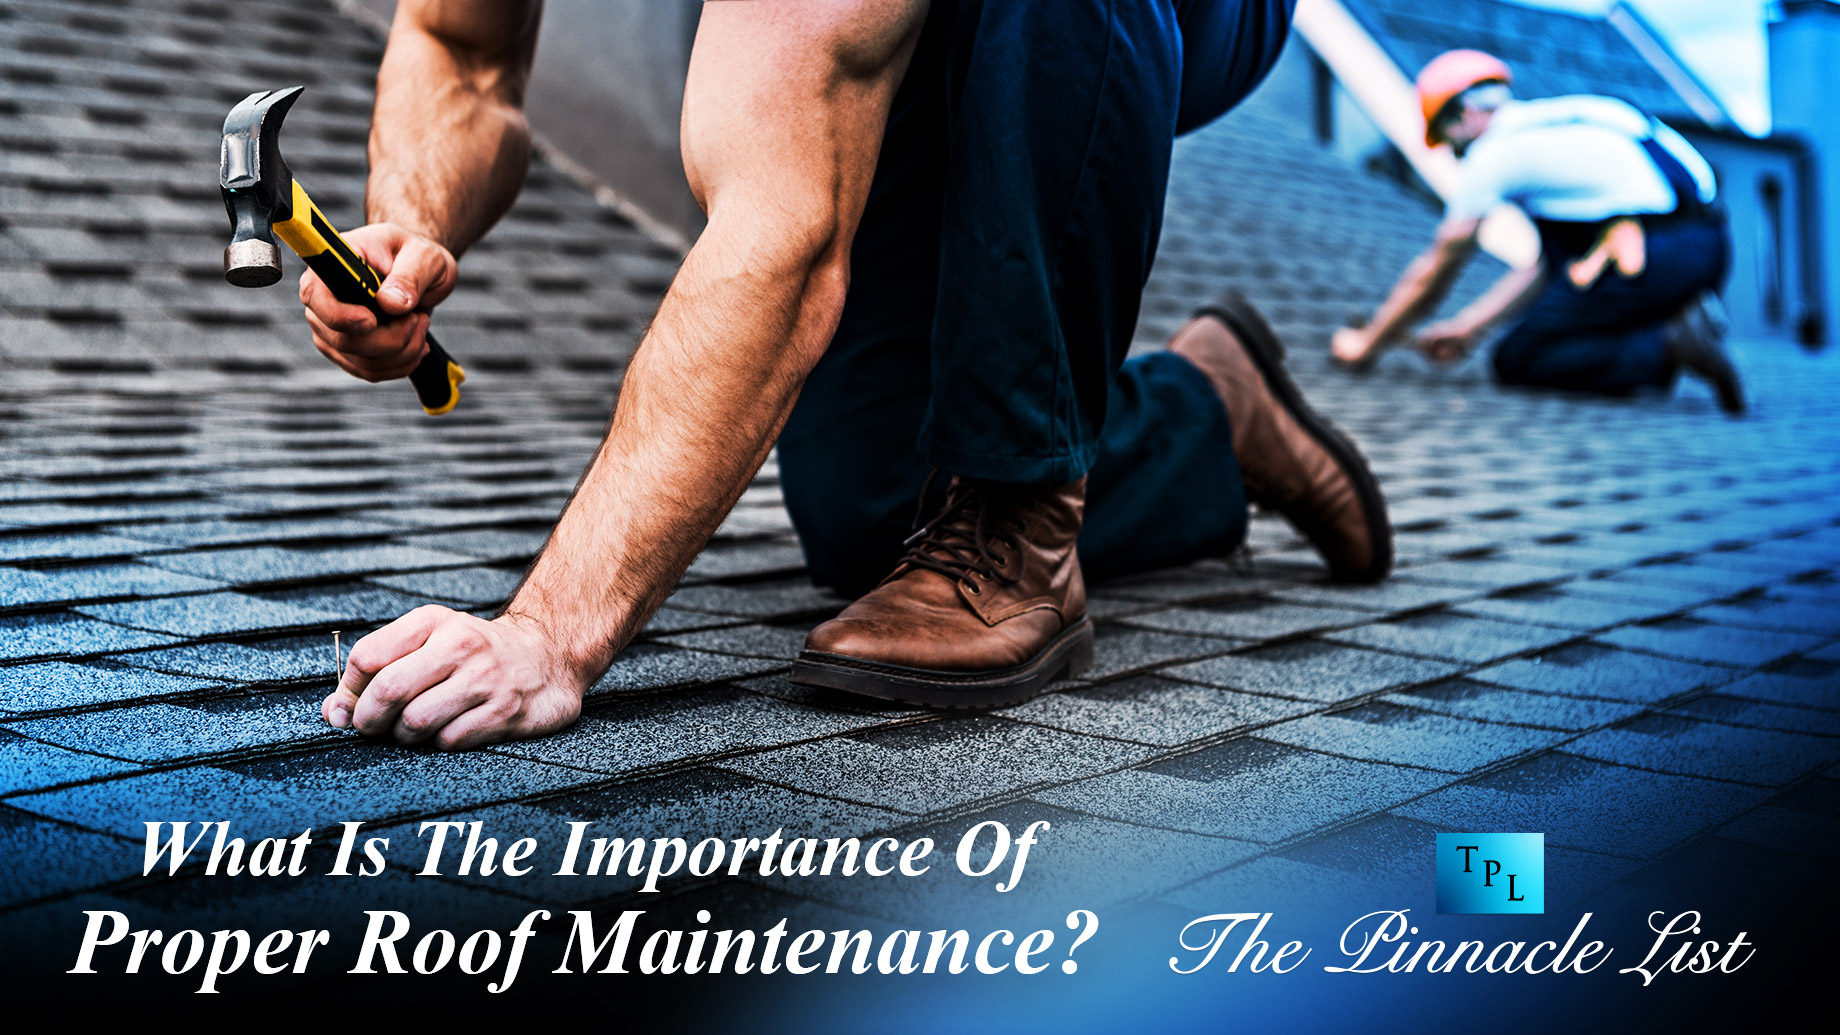 What Is The Importance Of Proper Roof Maintenance?